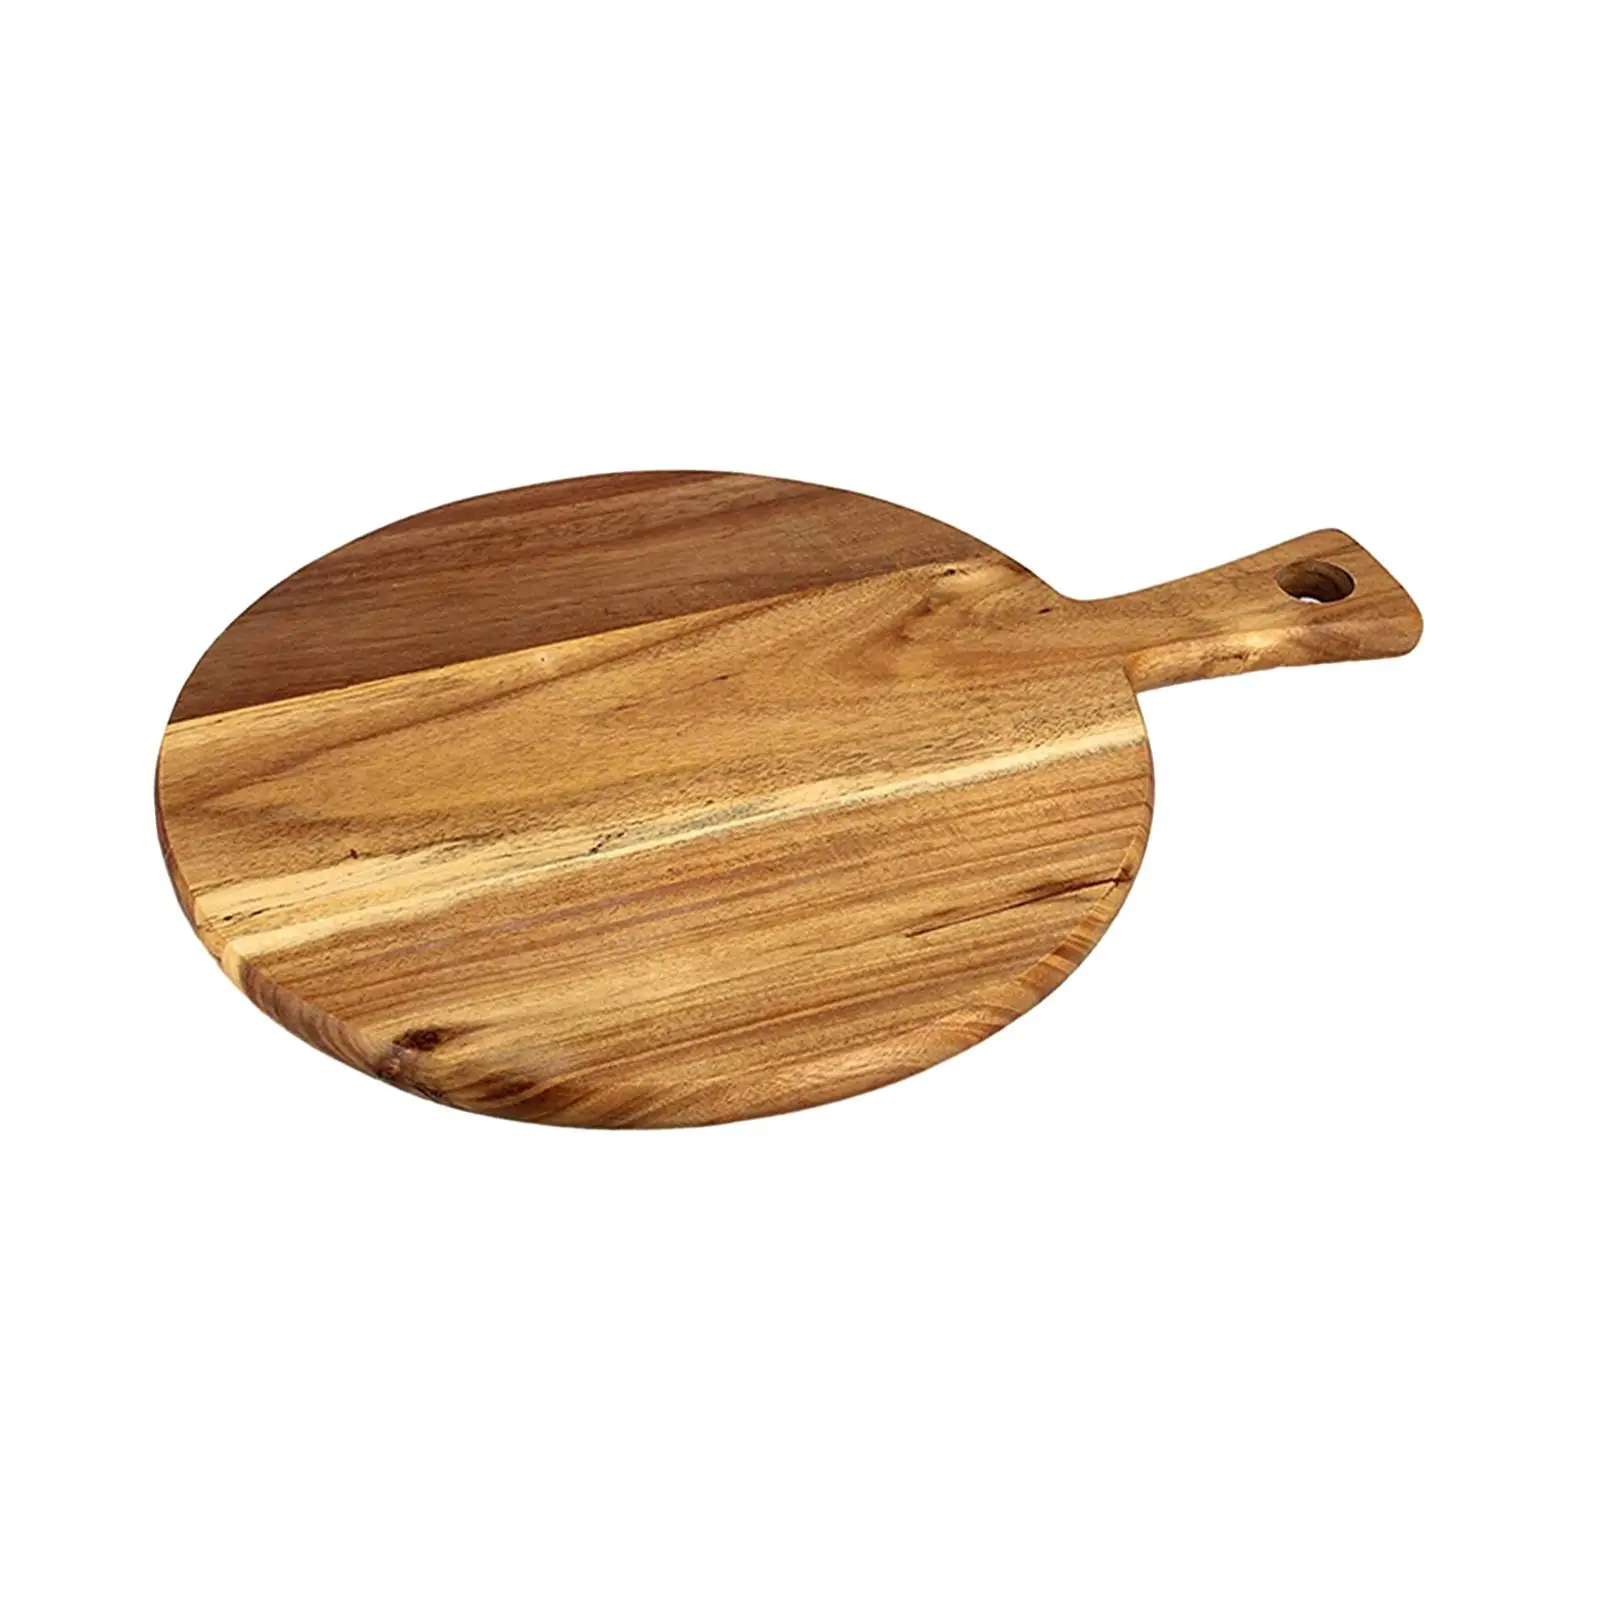 Wood Pizza Peel Vegetables Oven Accessories Lightweight for Cheese Bread Fruit Ergonomic Round Large Pizza Paddle Chopping Board